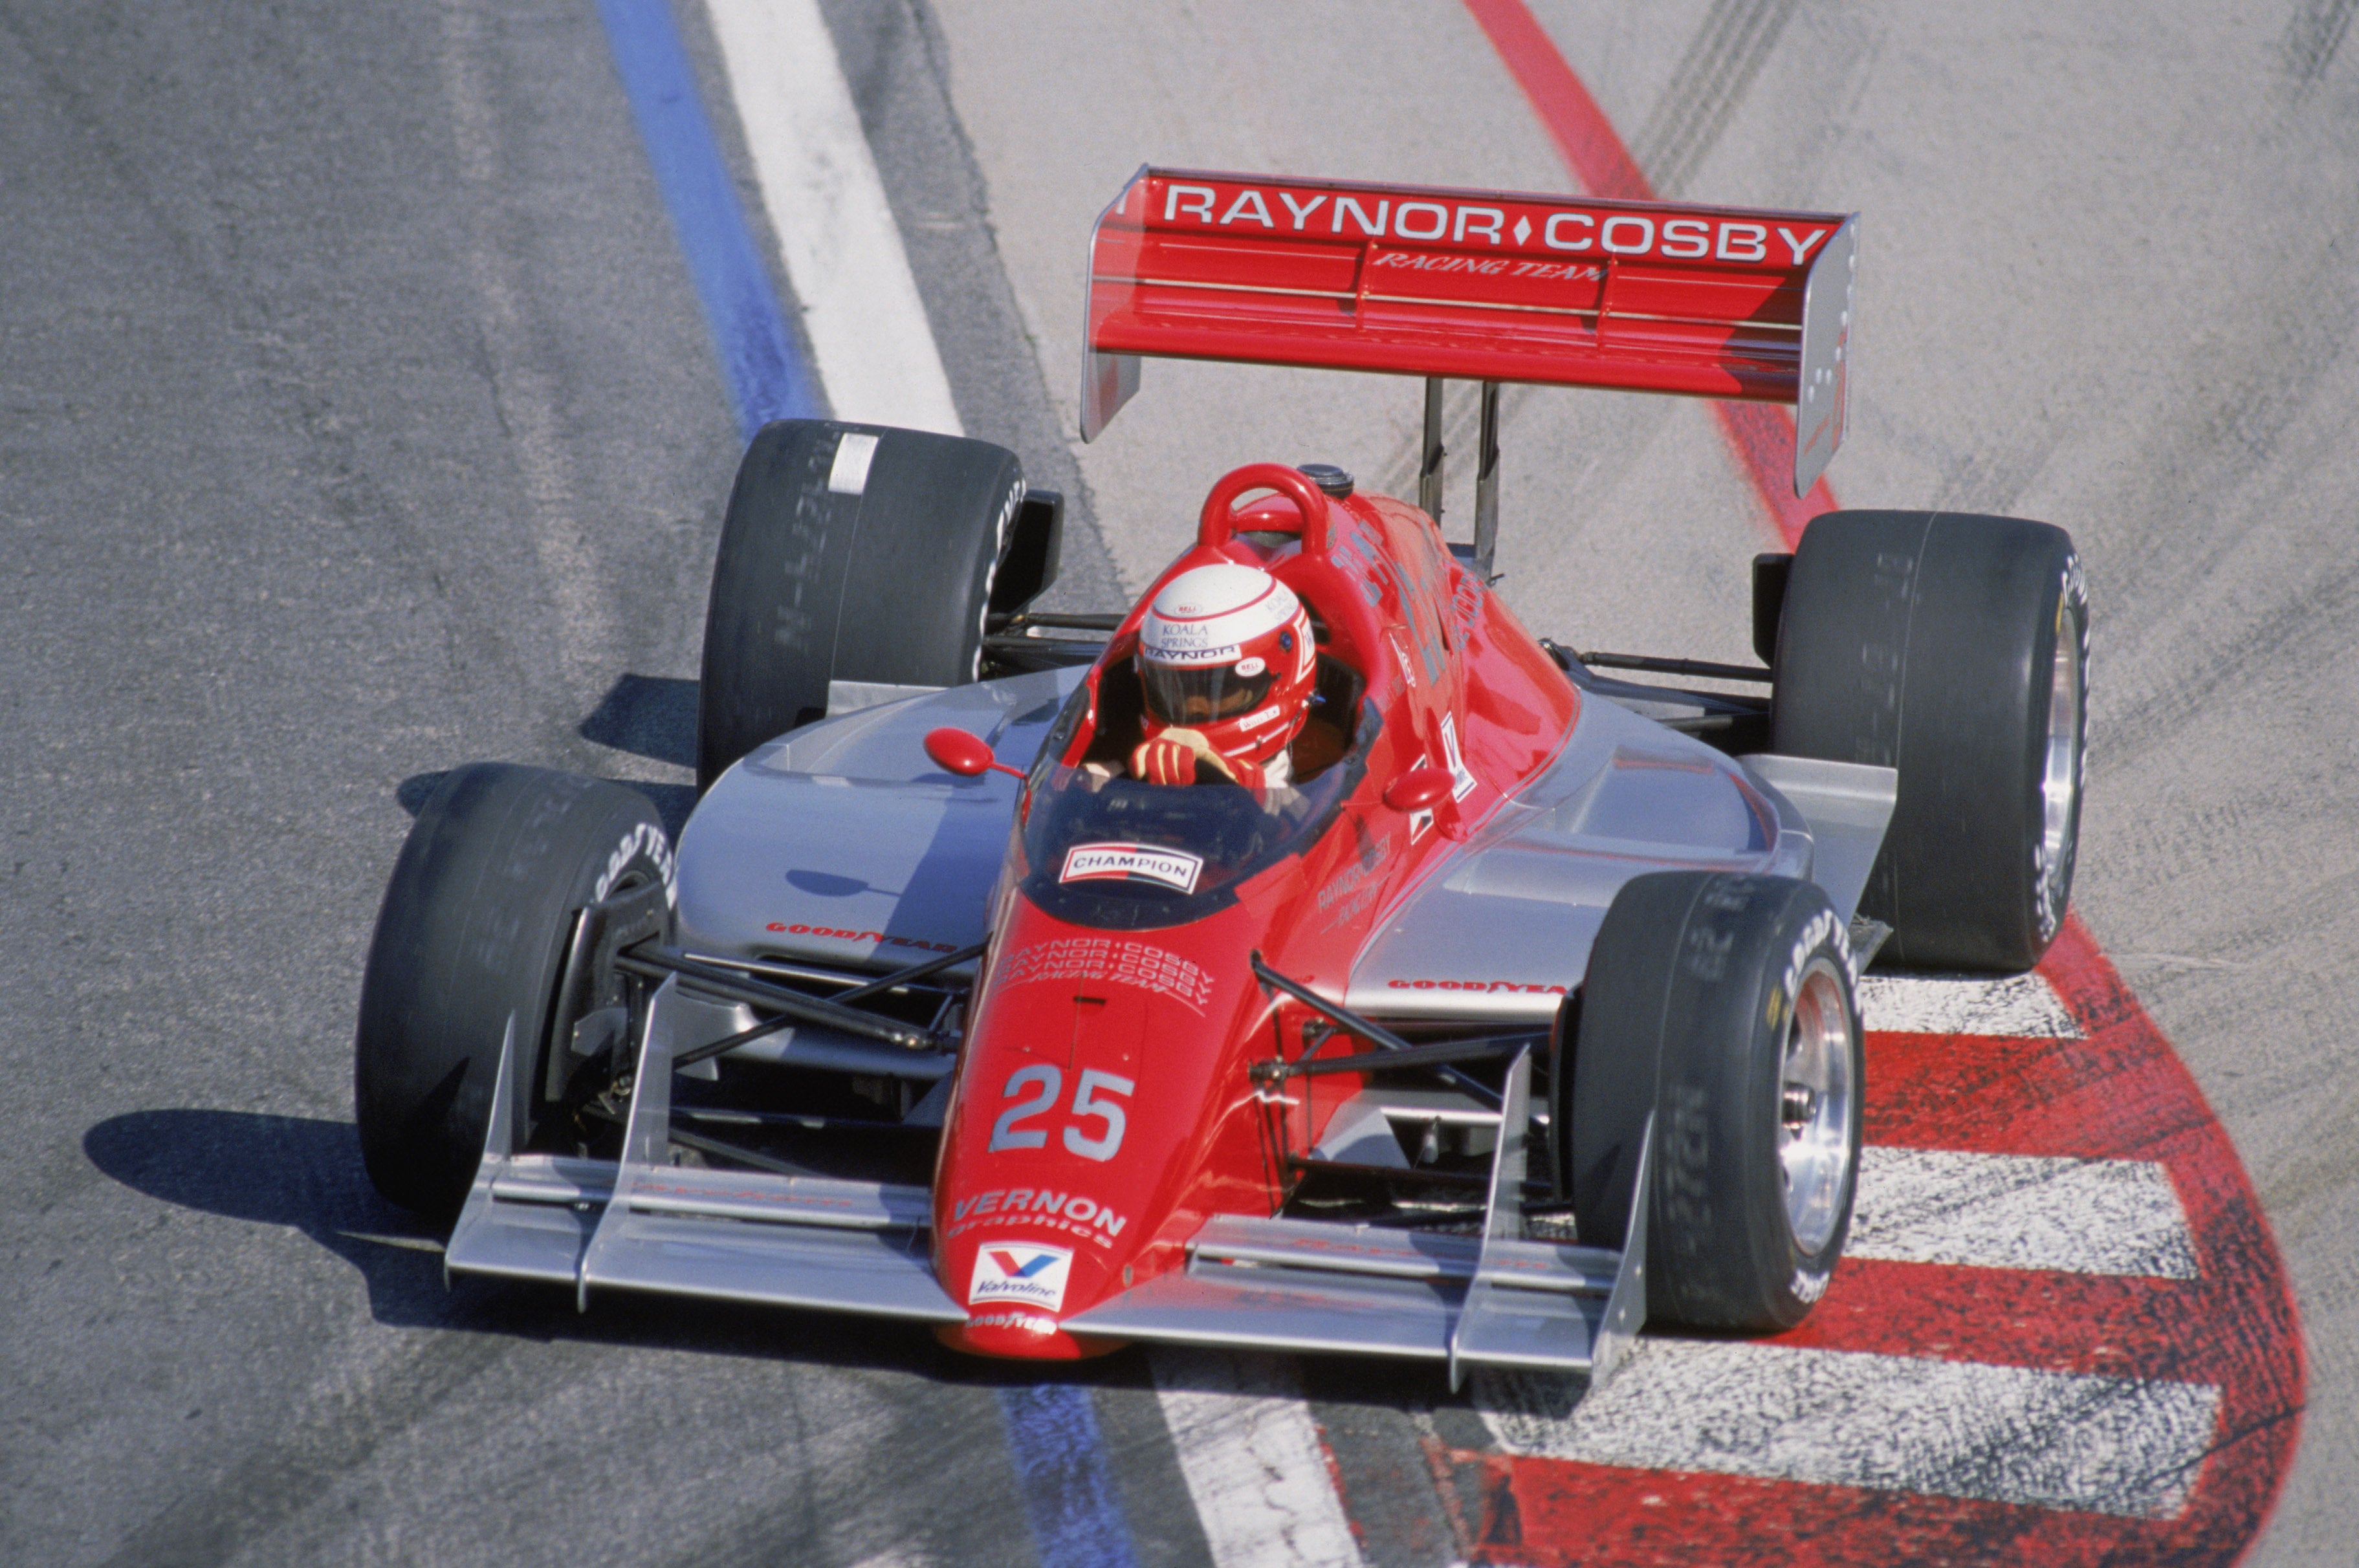 Ribbs made history in an F1 test in 1986 and in the Indy 500 in 1991